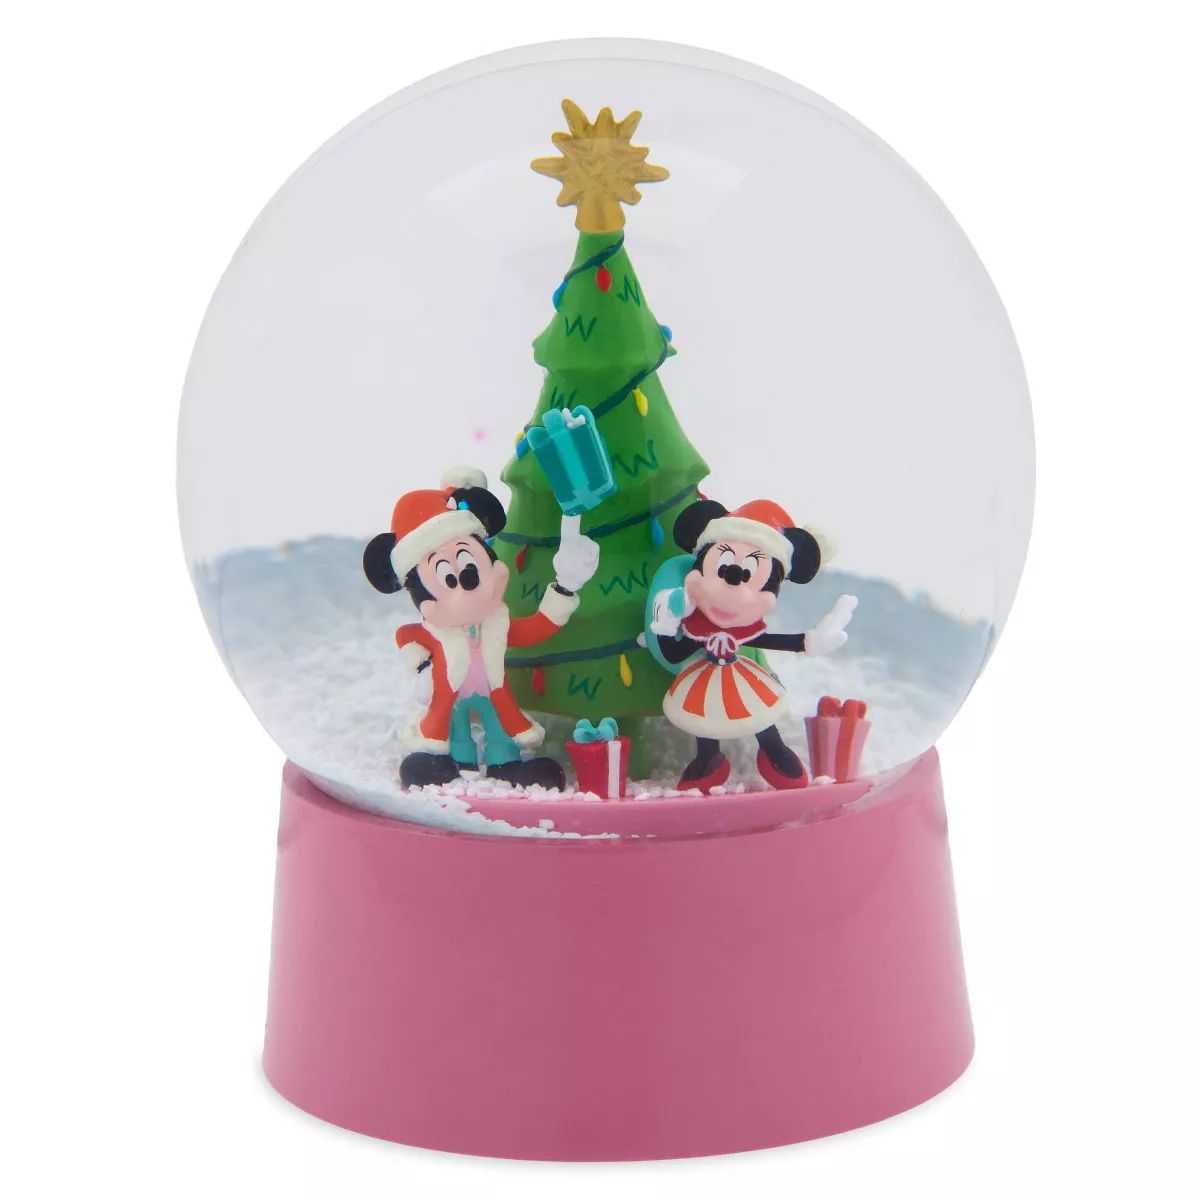 Disney Mickey Mouse & Friends Mickey Mouse & Minnie Mouse Snow Globe - Disney store | Target